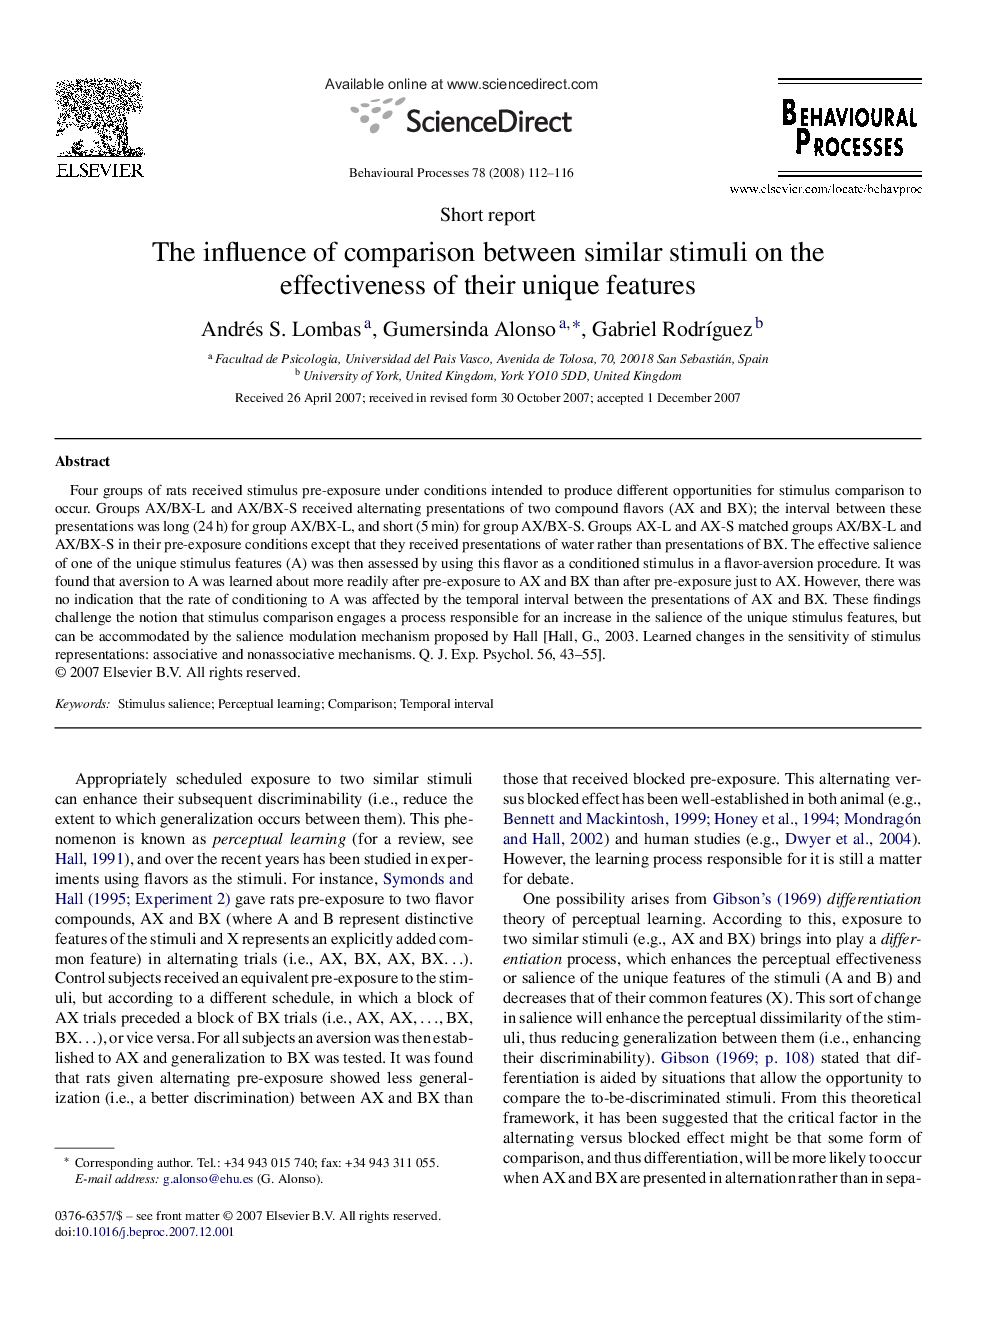 The influence of comparison between similar stimuli on the effectiveness of their unique features